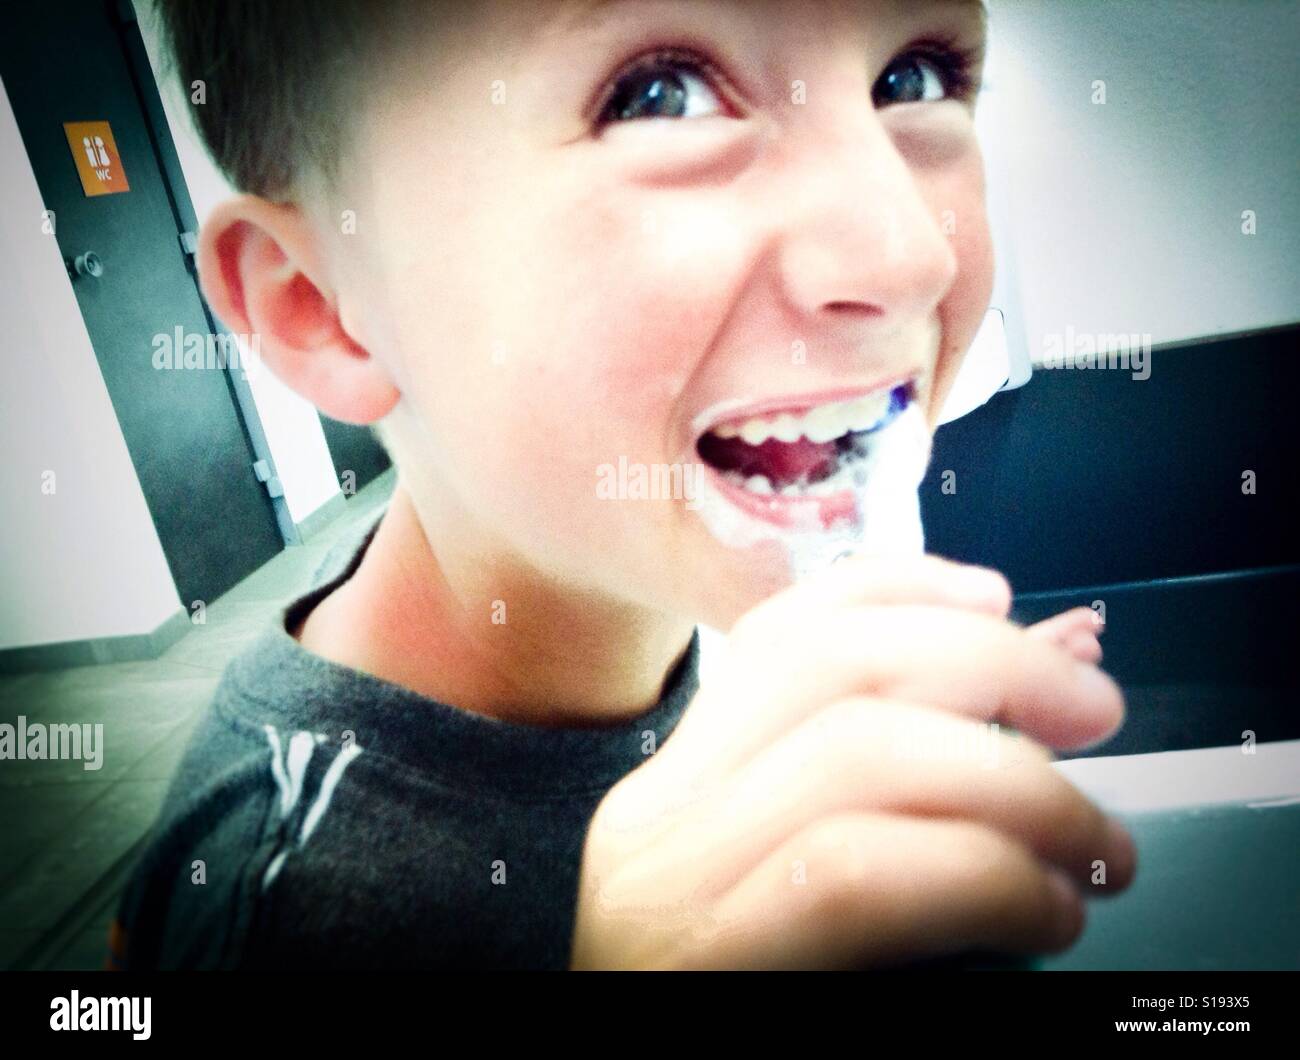 Boy cleaning his teeth, child burnishing his teeth with a toothbrush Stock Photo